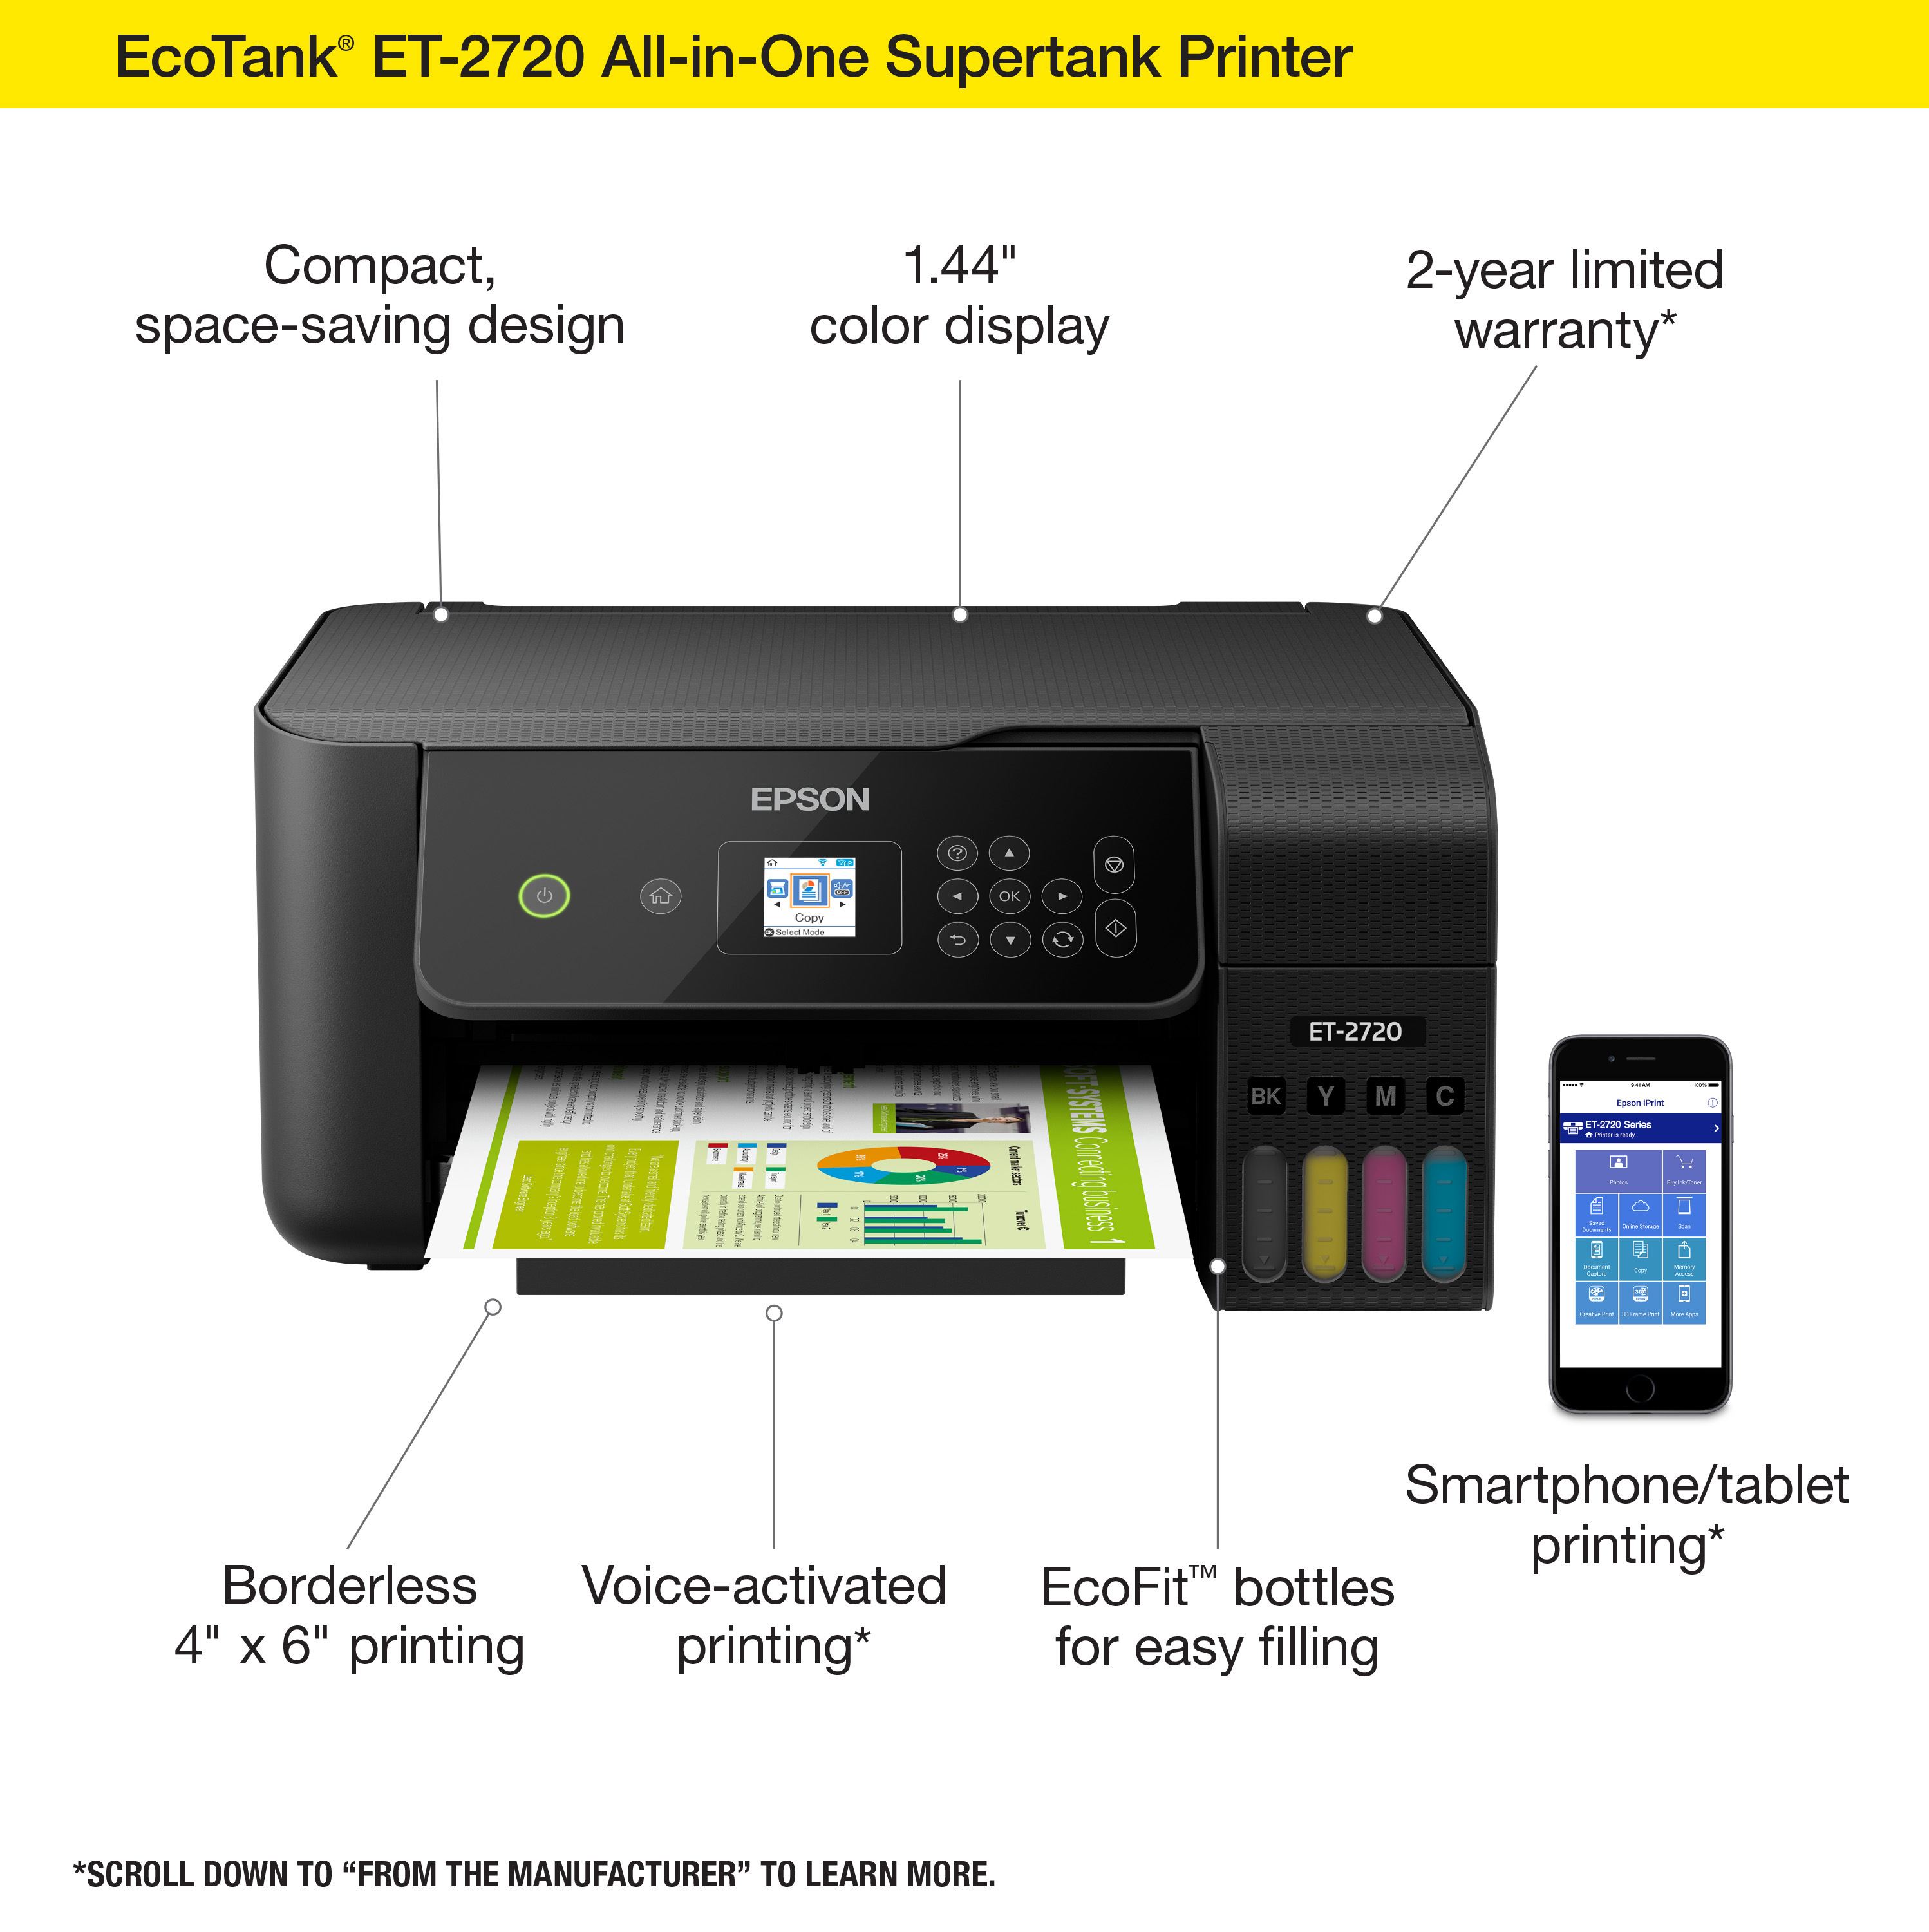 Epson EcoTank ET-2720 Wireless All-in-One Color Supertank Printer - Black - image 2 of 4